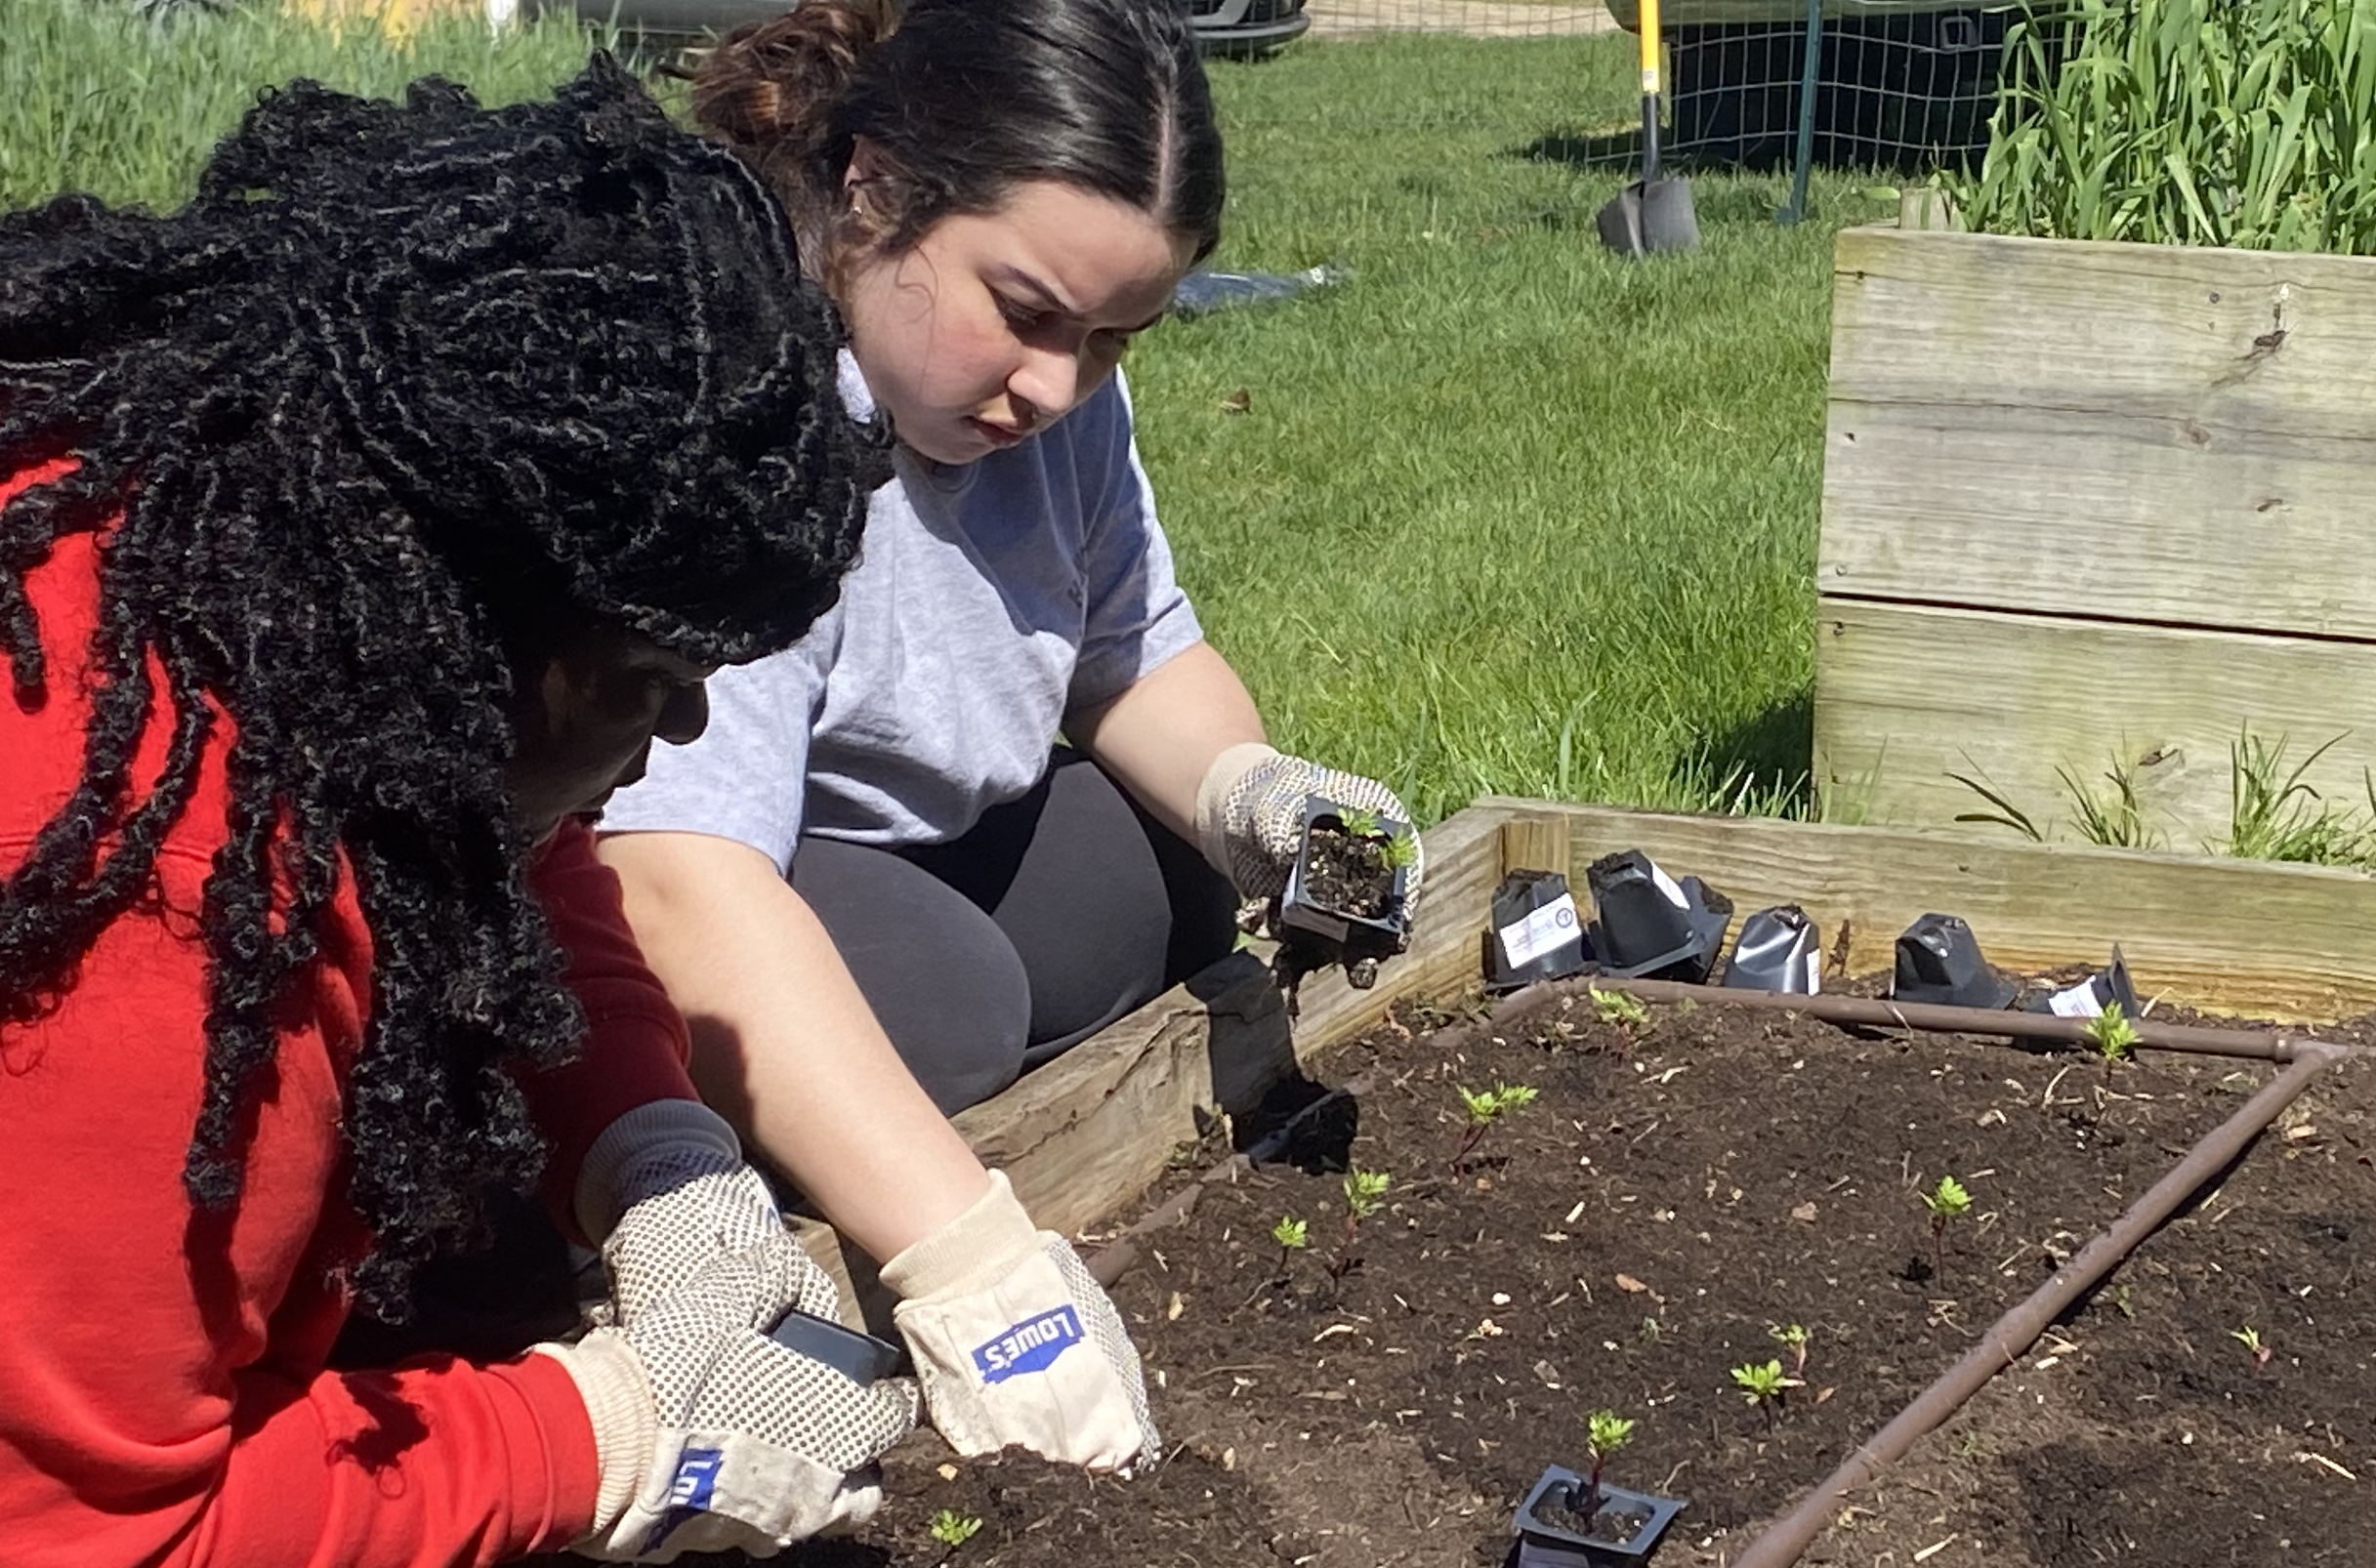 DSU students help plant seedlings in the Community Garden, DSU Downtown campus.